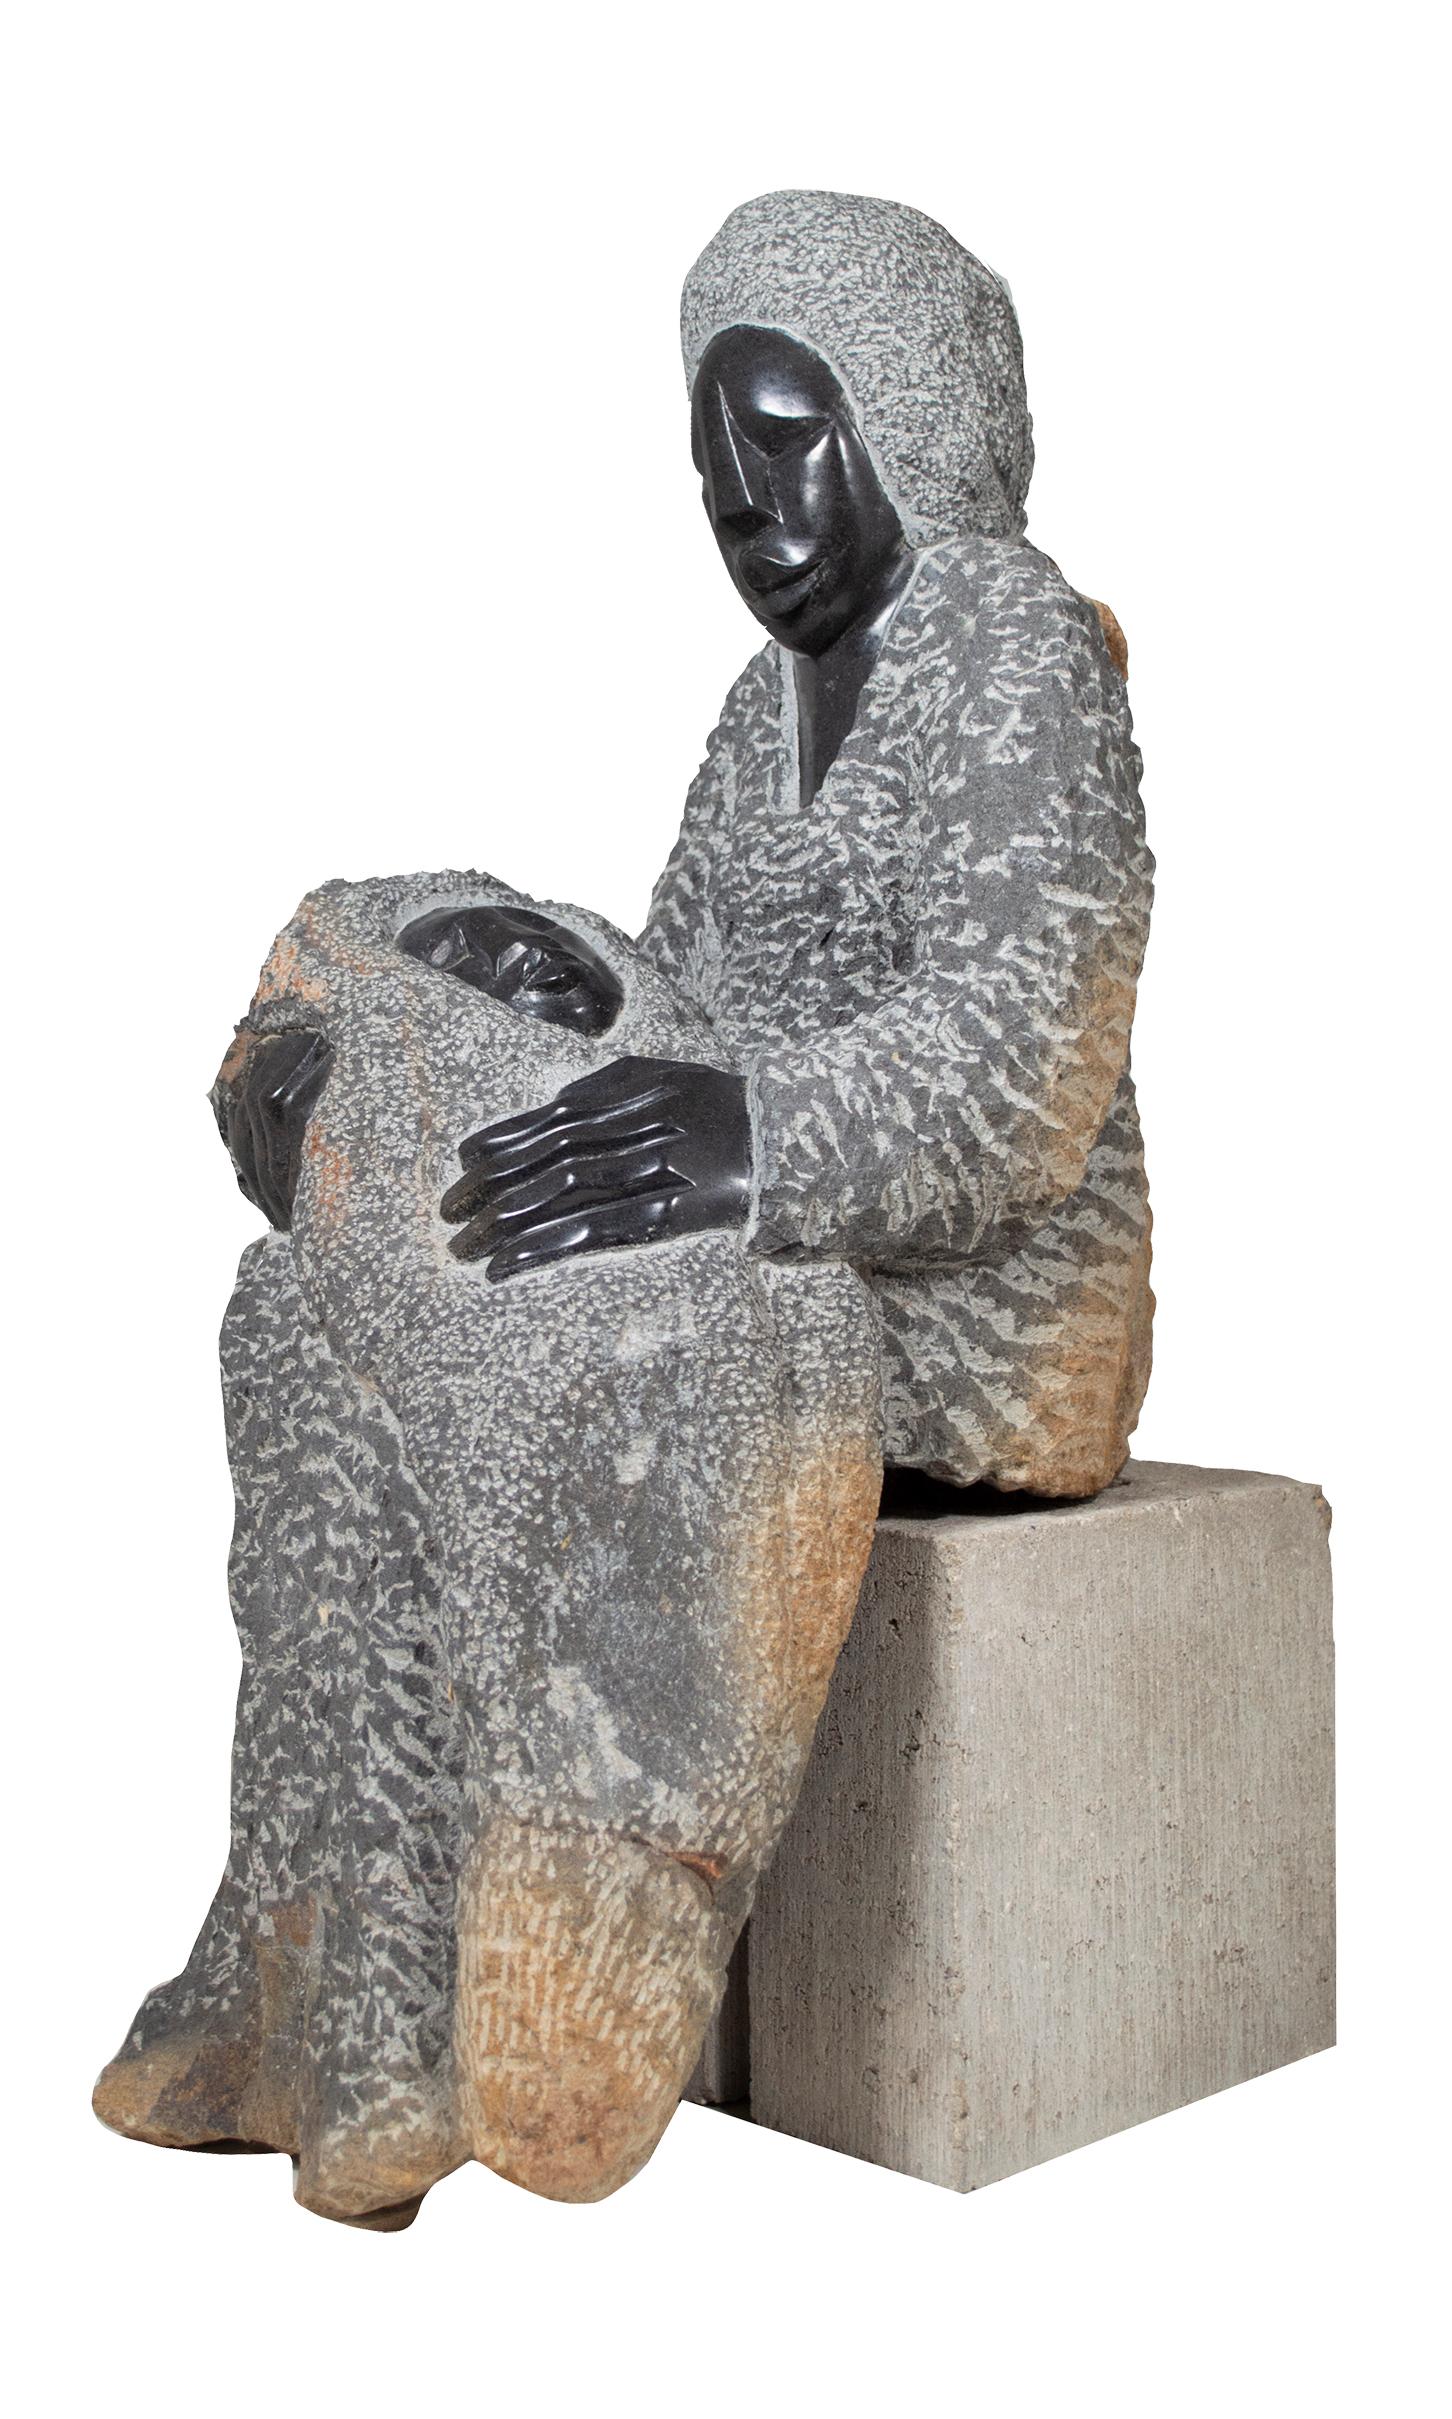 shona sculpture mother and child